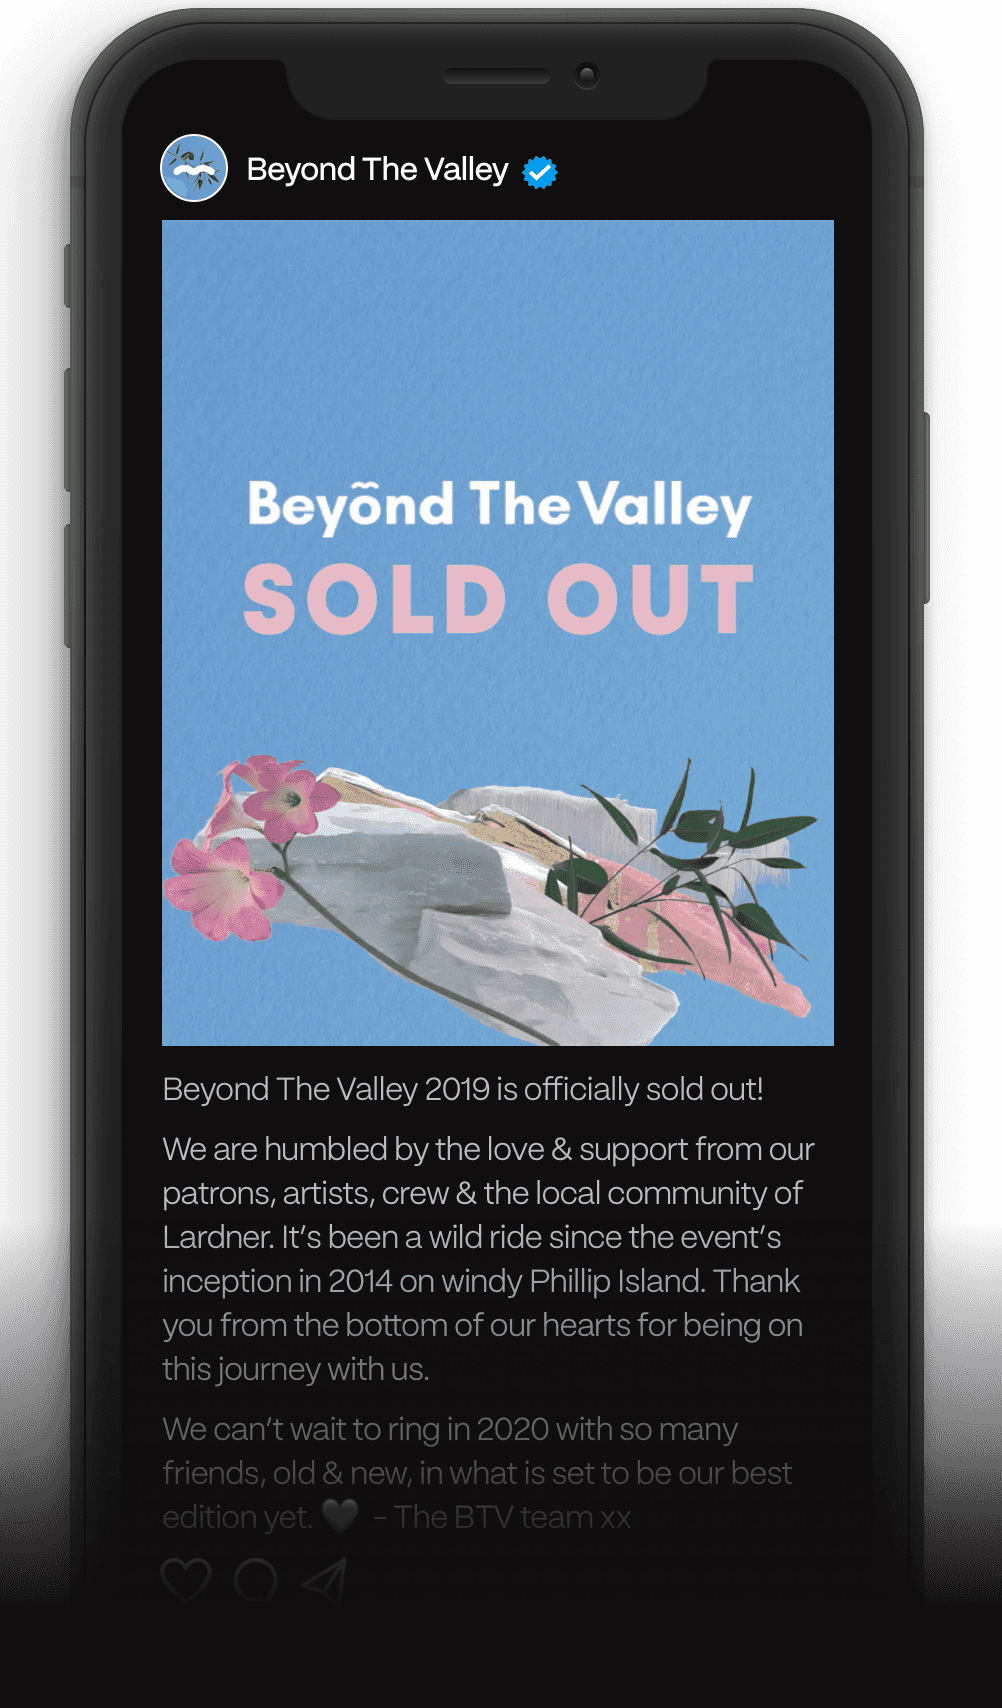 Beyond The Valley 2019 is officially sold out!